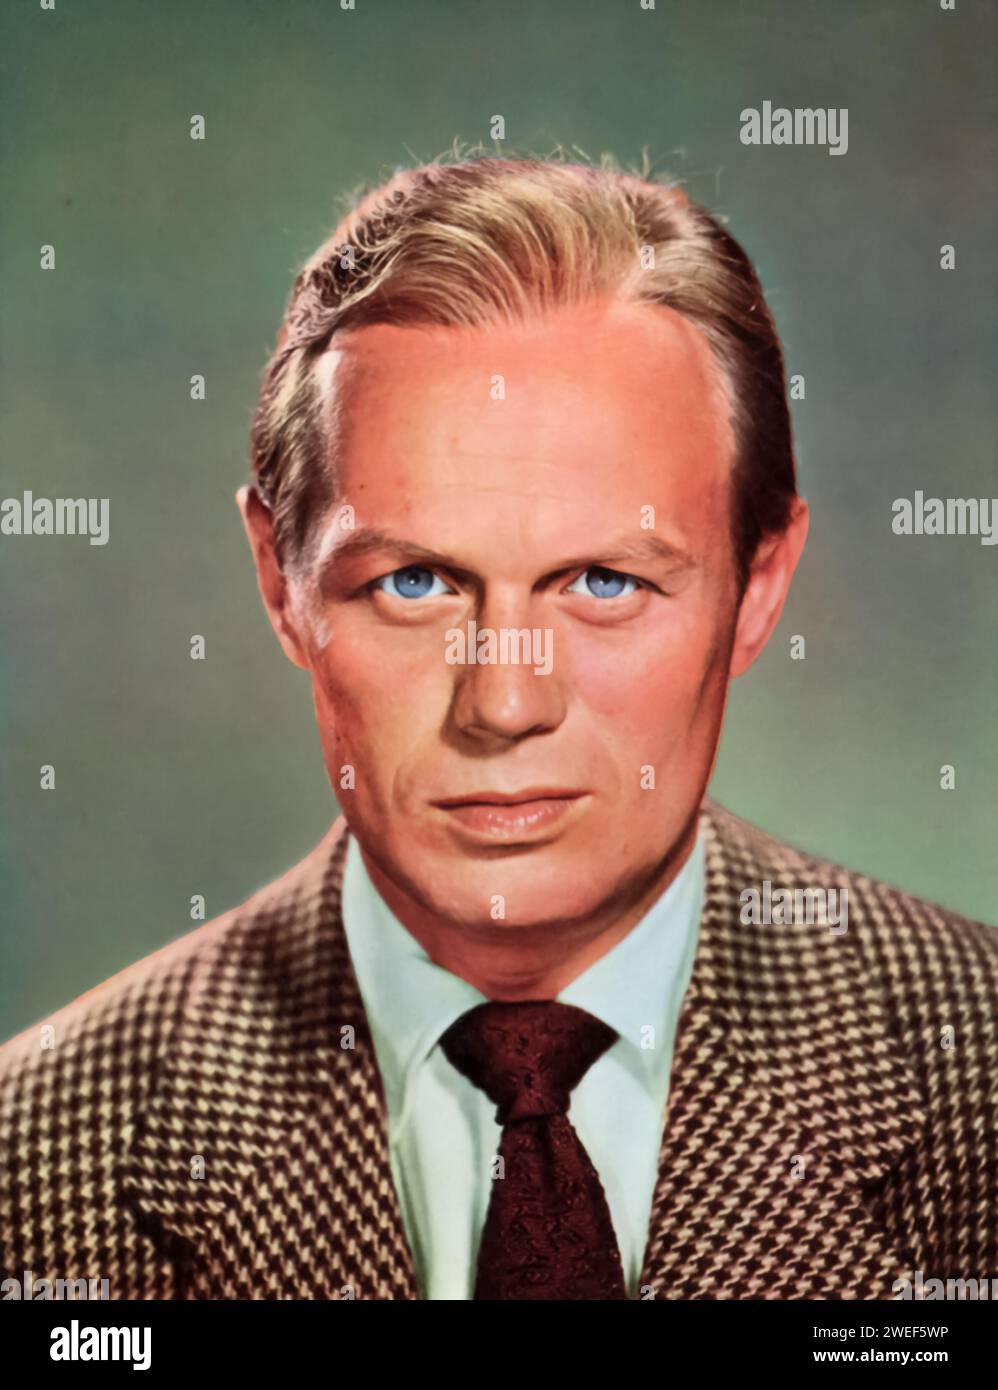 A portrait of actor and star Richard Widmark, famous for his role in 'Halls of Montezuma' (1951). In this war film, Widmark plays Lieutenant Carl Anderson, a Marine Corps officer leading a team of reconnaissance troops during World War II. Set in the Pacific theater, the film focuses on the challenges and dangers faced by Anderson and his men as they embark on a mission to capture a Japanese-held island. Stock Photo